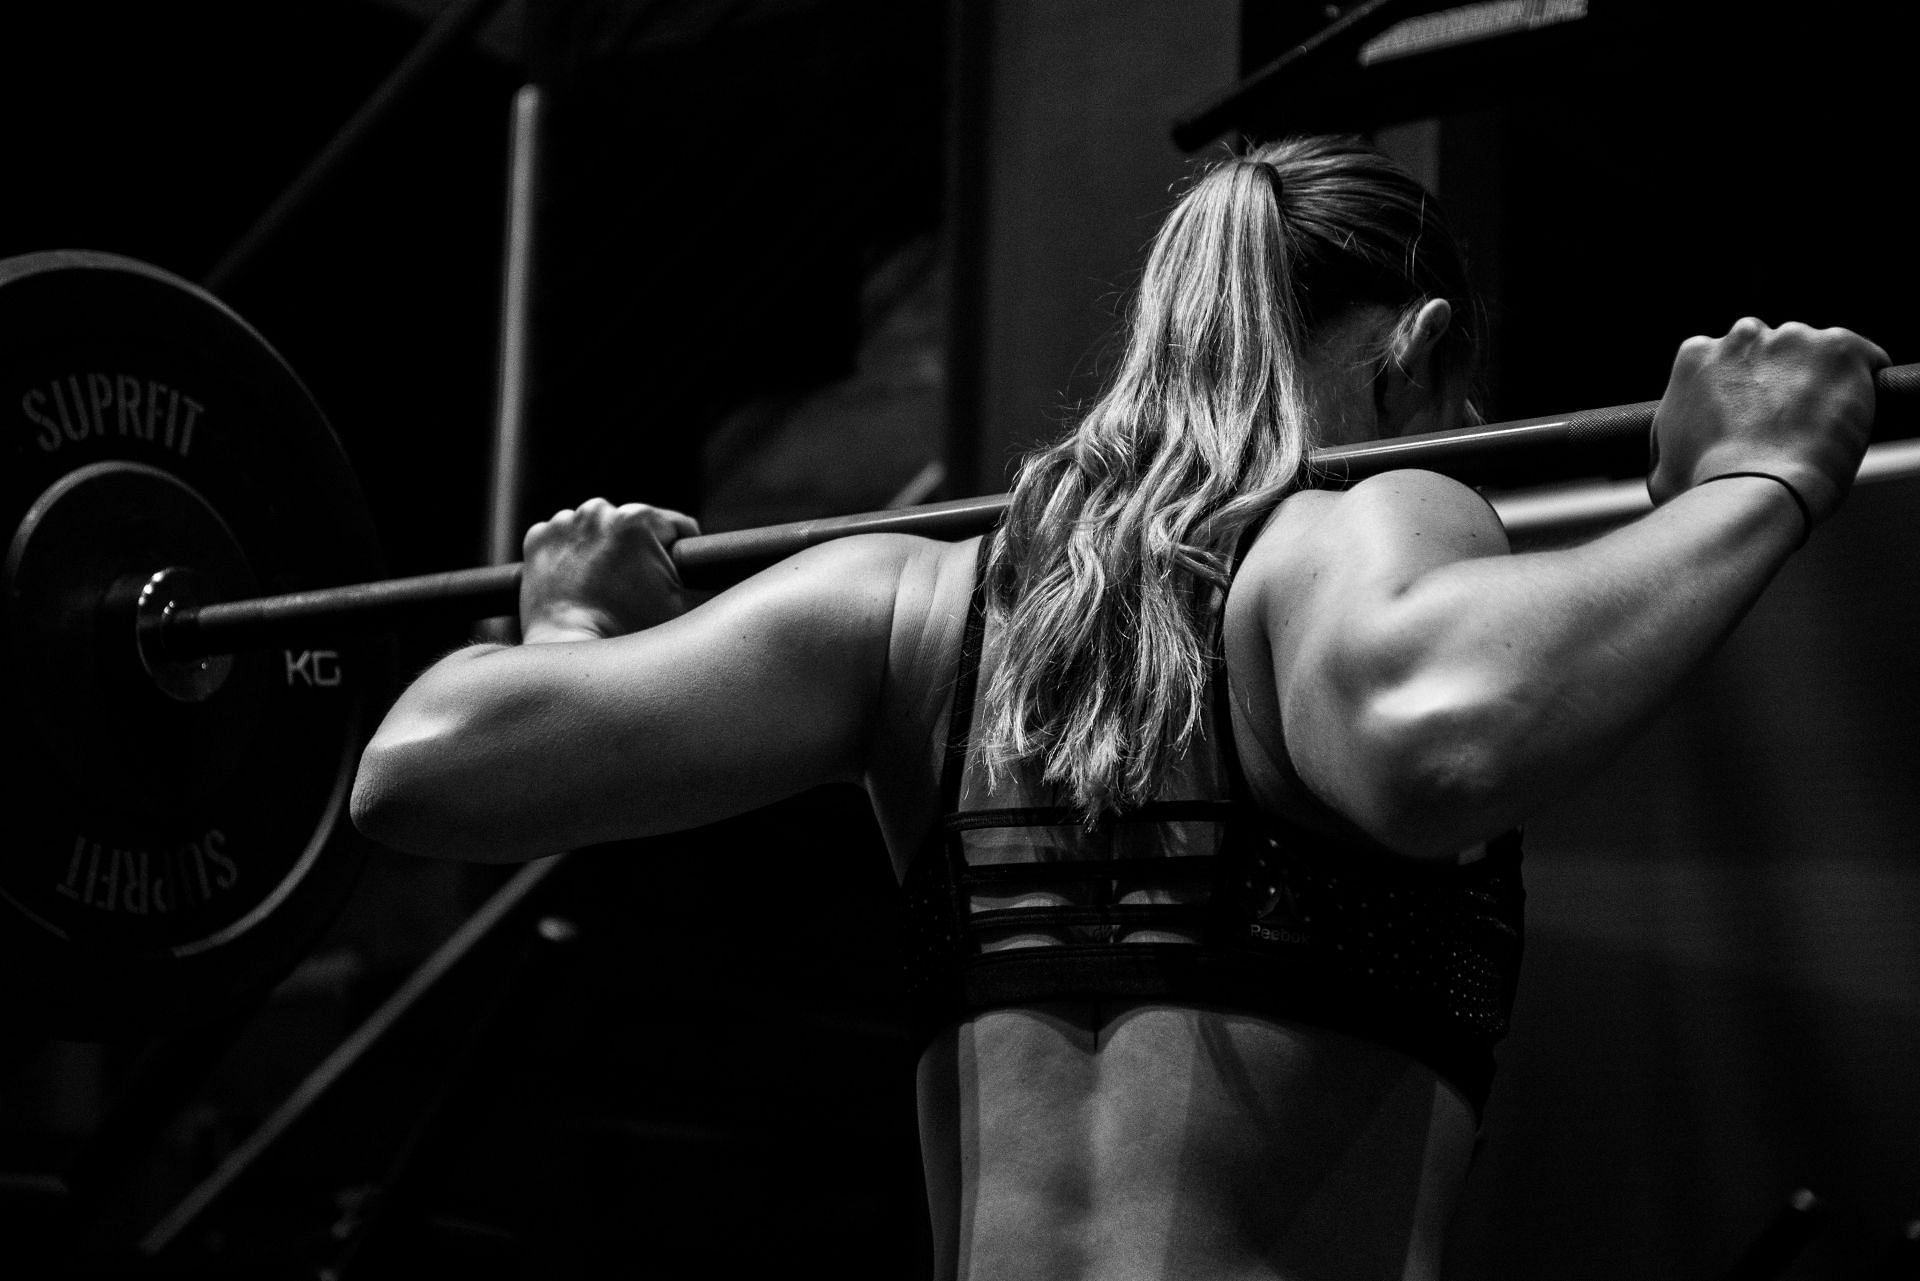 Appropriate diet and weighted exercises can help reduce back fat. (Image via Unsplash / Sven Mieke)